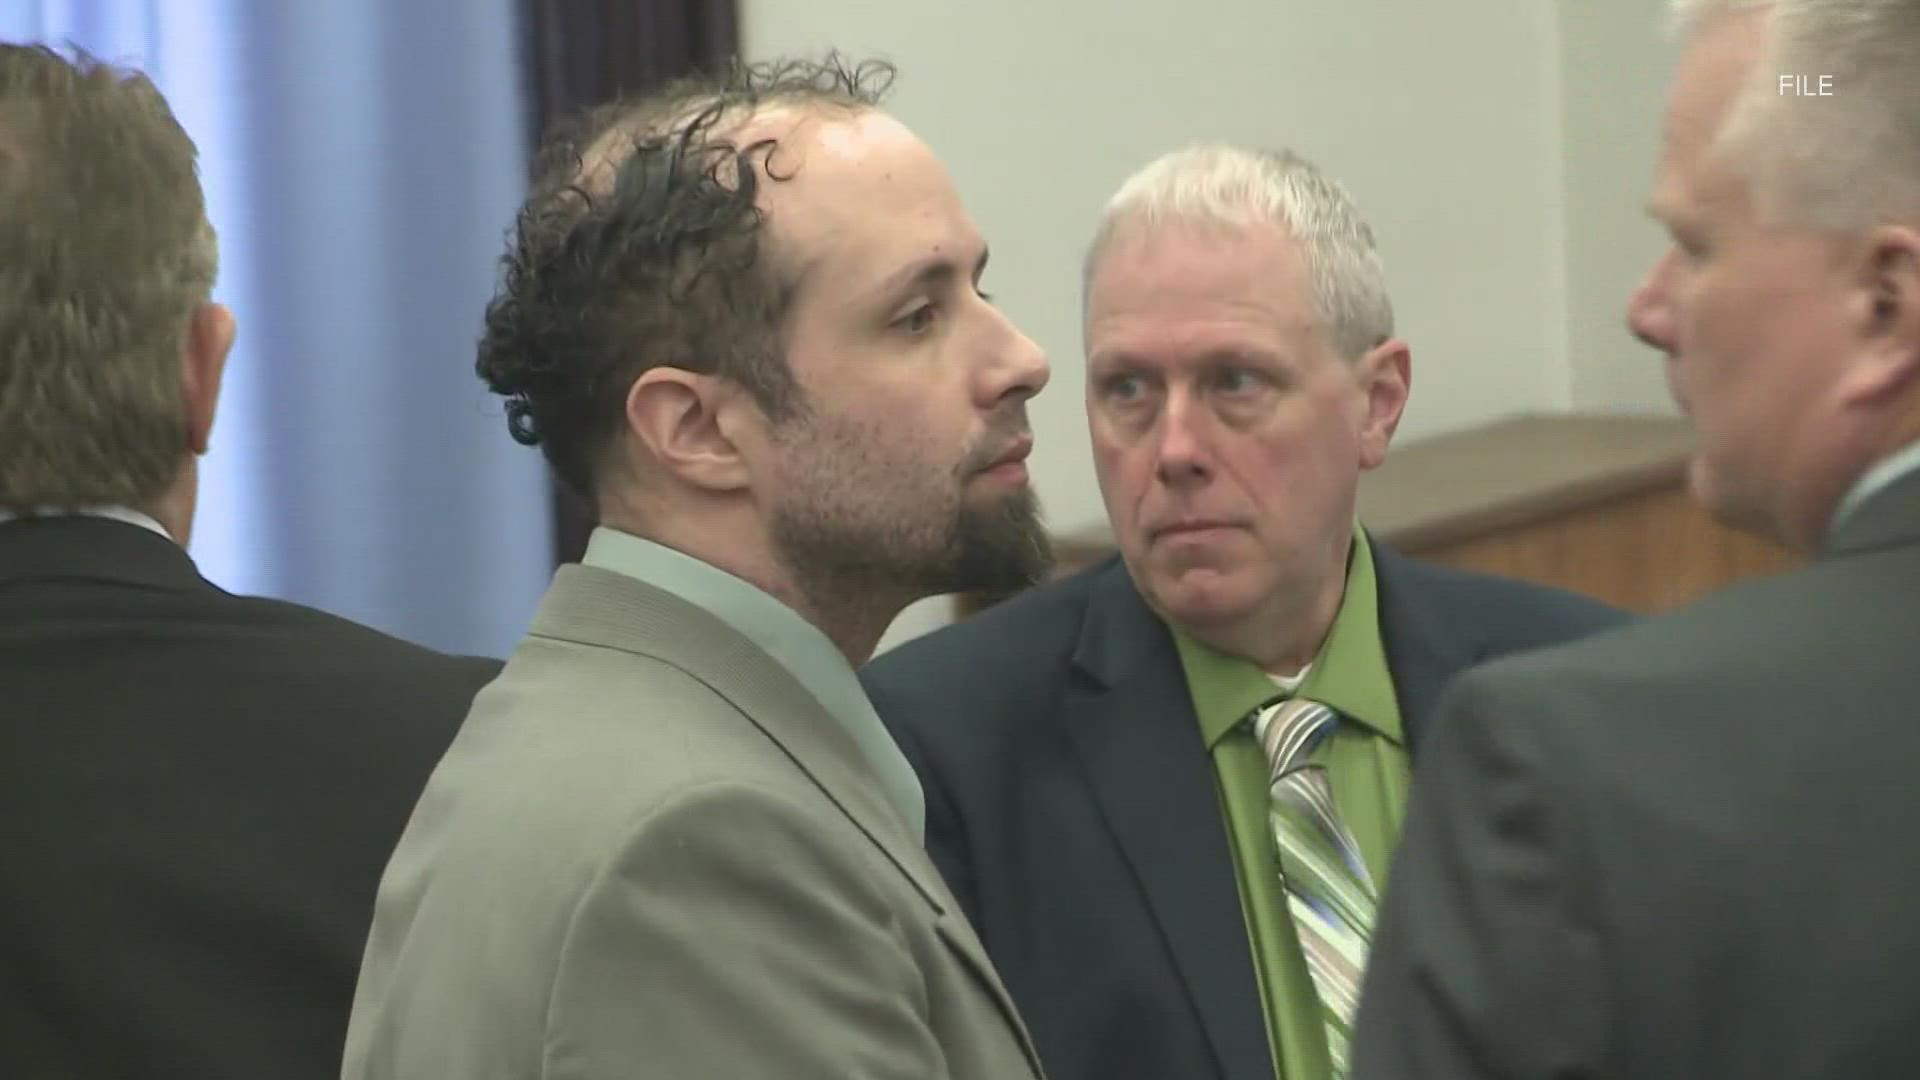 Luc Tieman was found guilty in 2018 for the shooting death of his wife, Valerie Tieman.